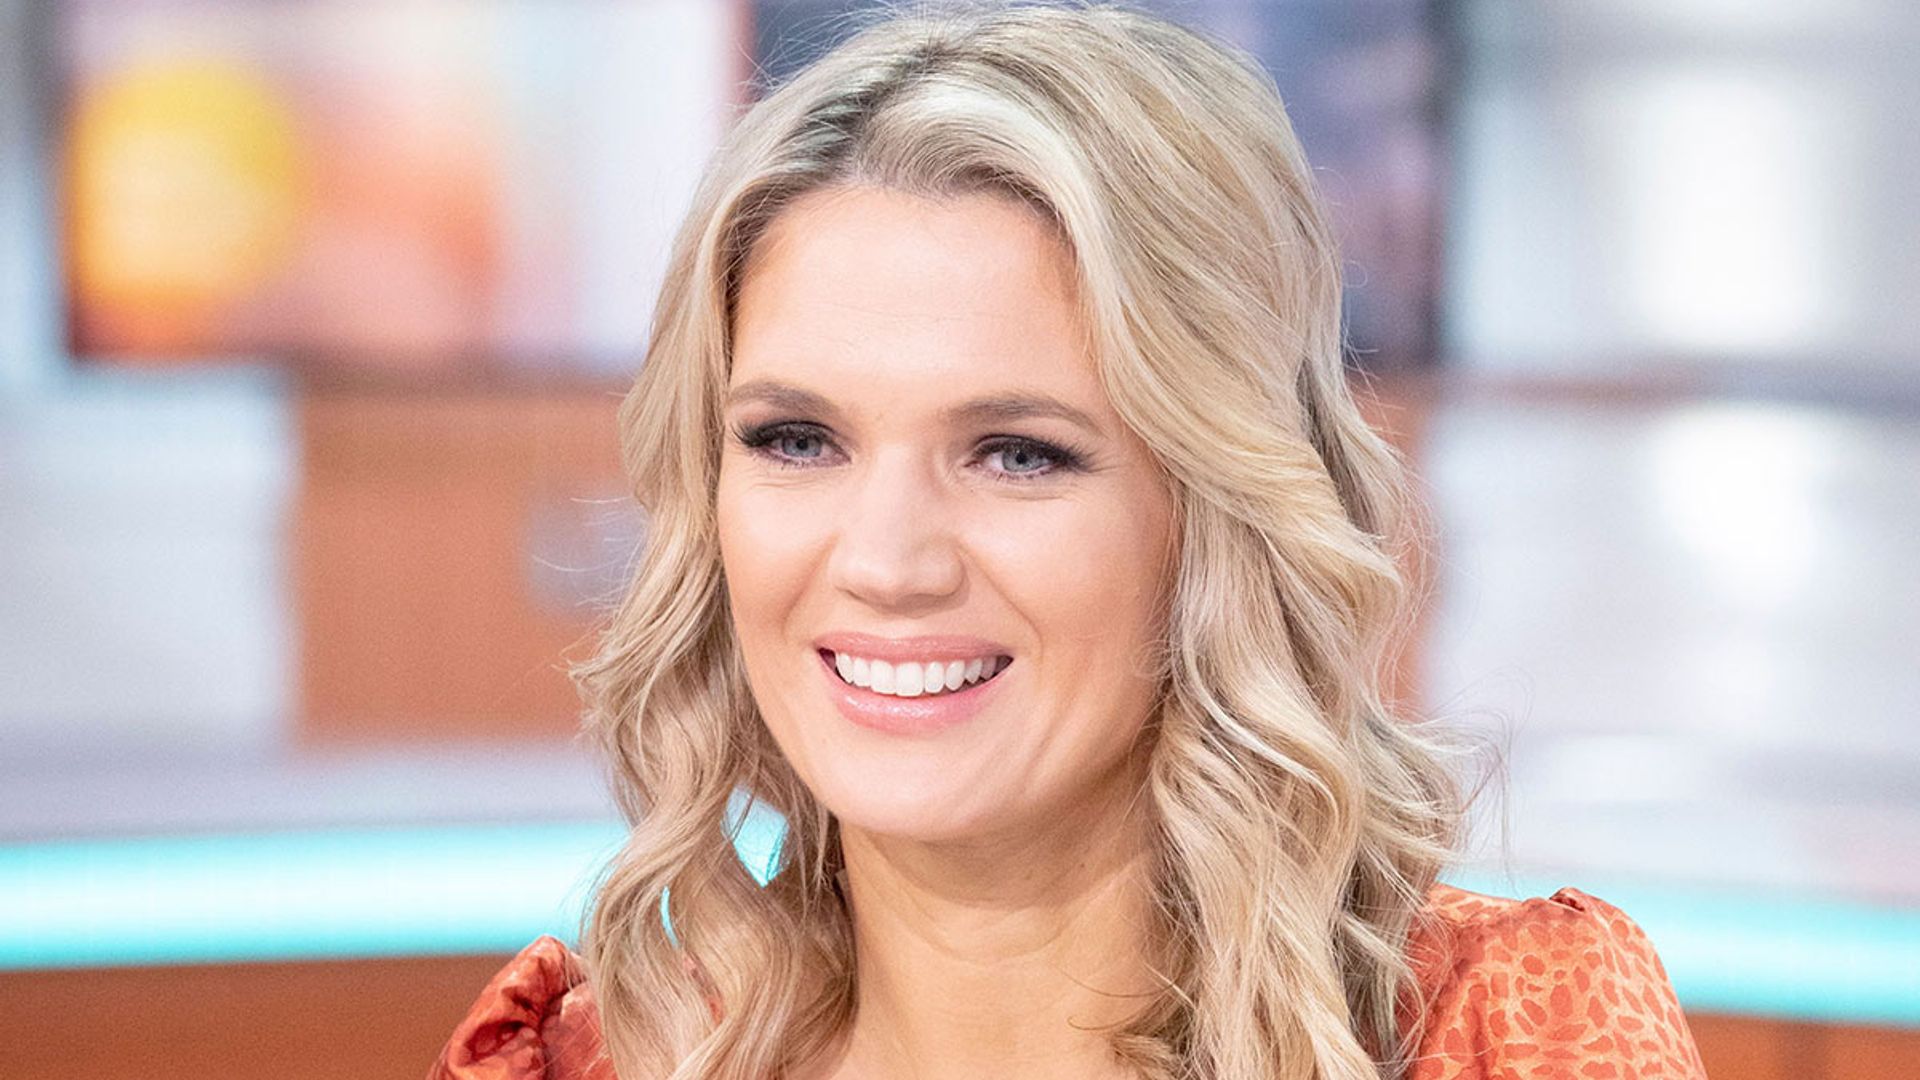 Charlotte Hawkins' leopard print dress stole the show on Good Morning Britain